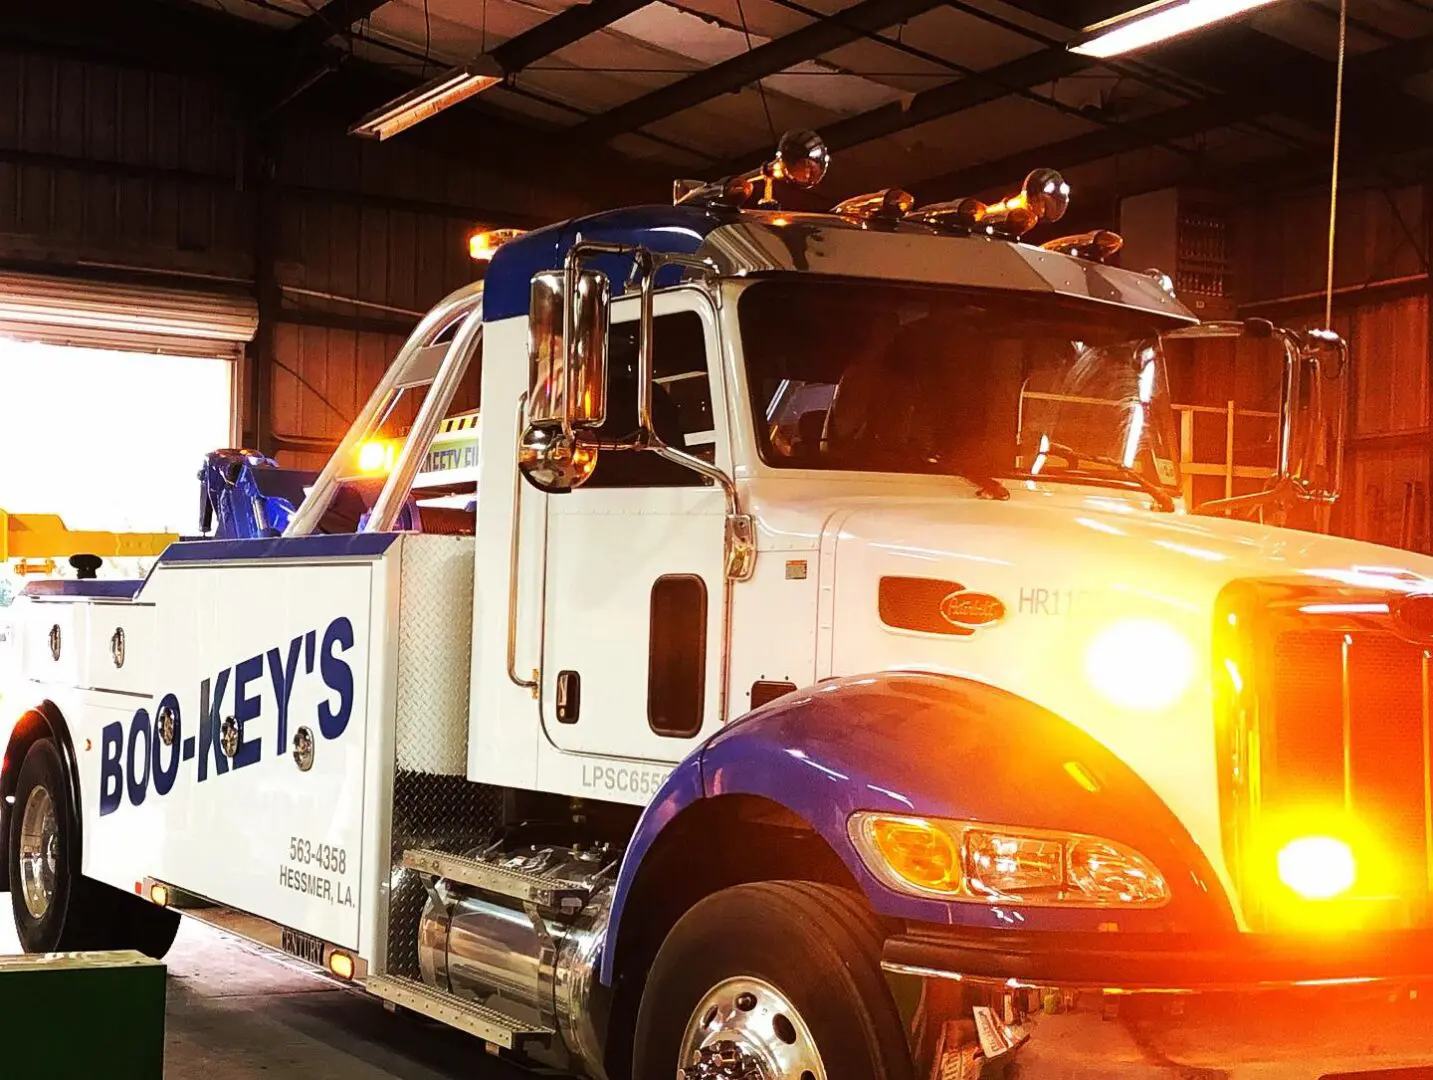 Boo-Key's Wrecker Service Tow Truck Wrap, Reflective Lettering, Reflective Decals & Graphics, Hessmer, Louisiana, HLA Signs